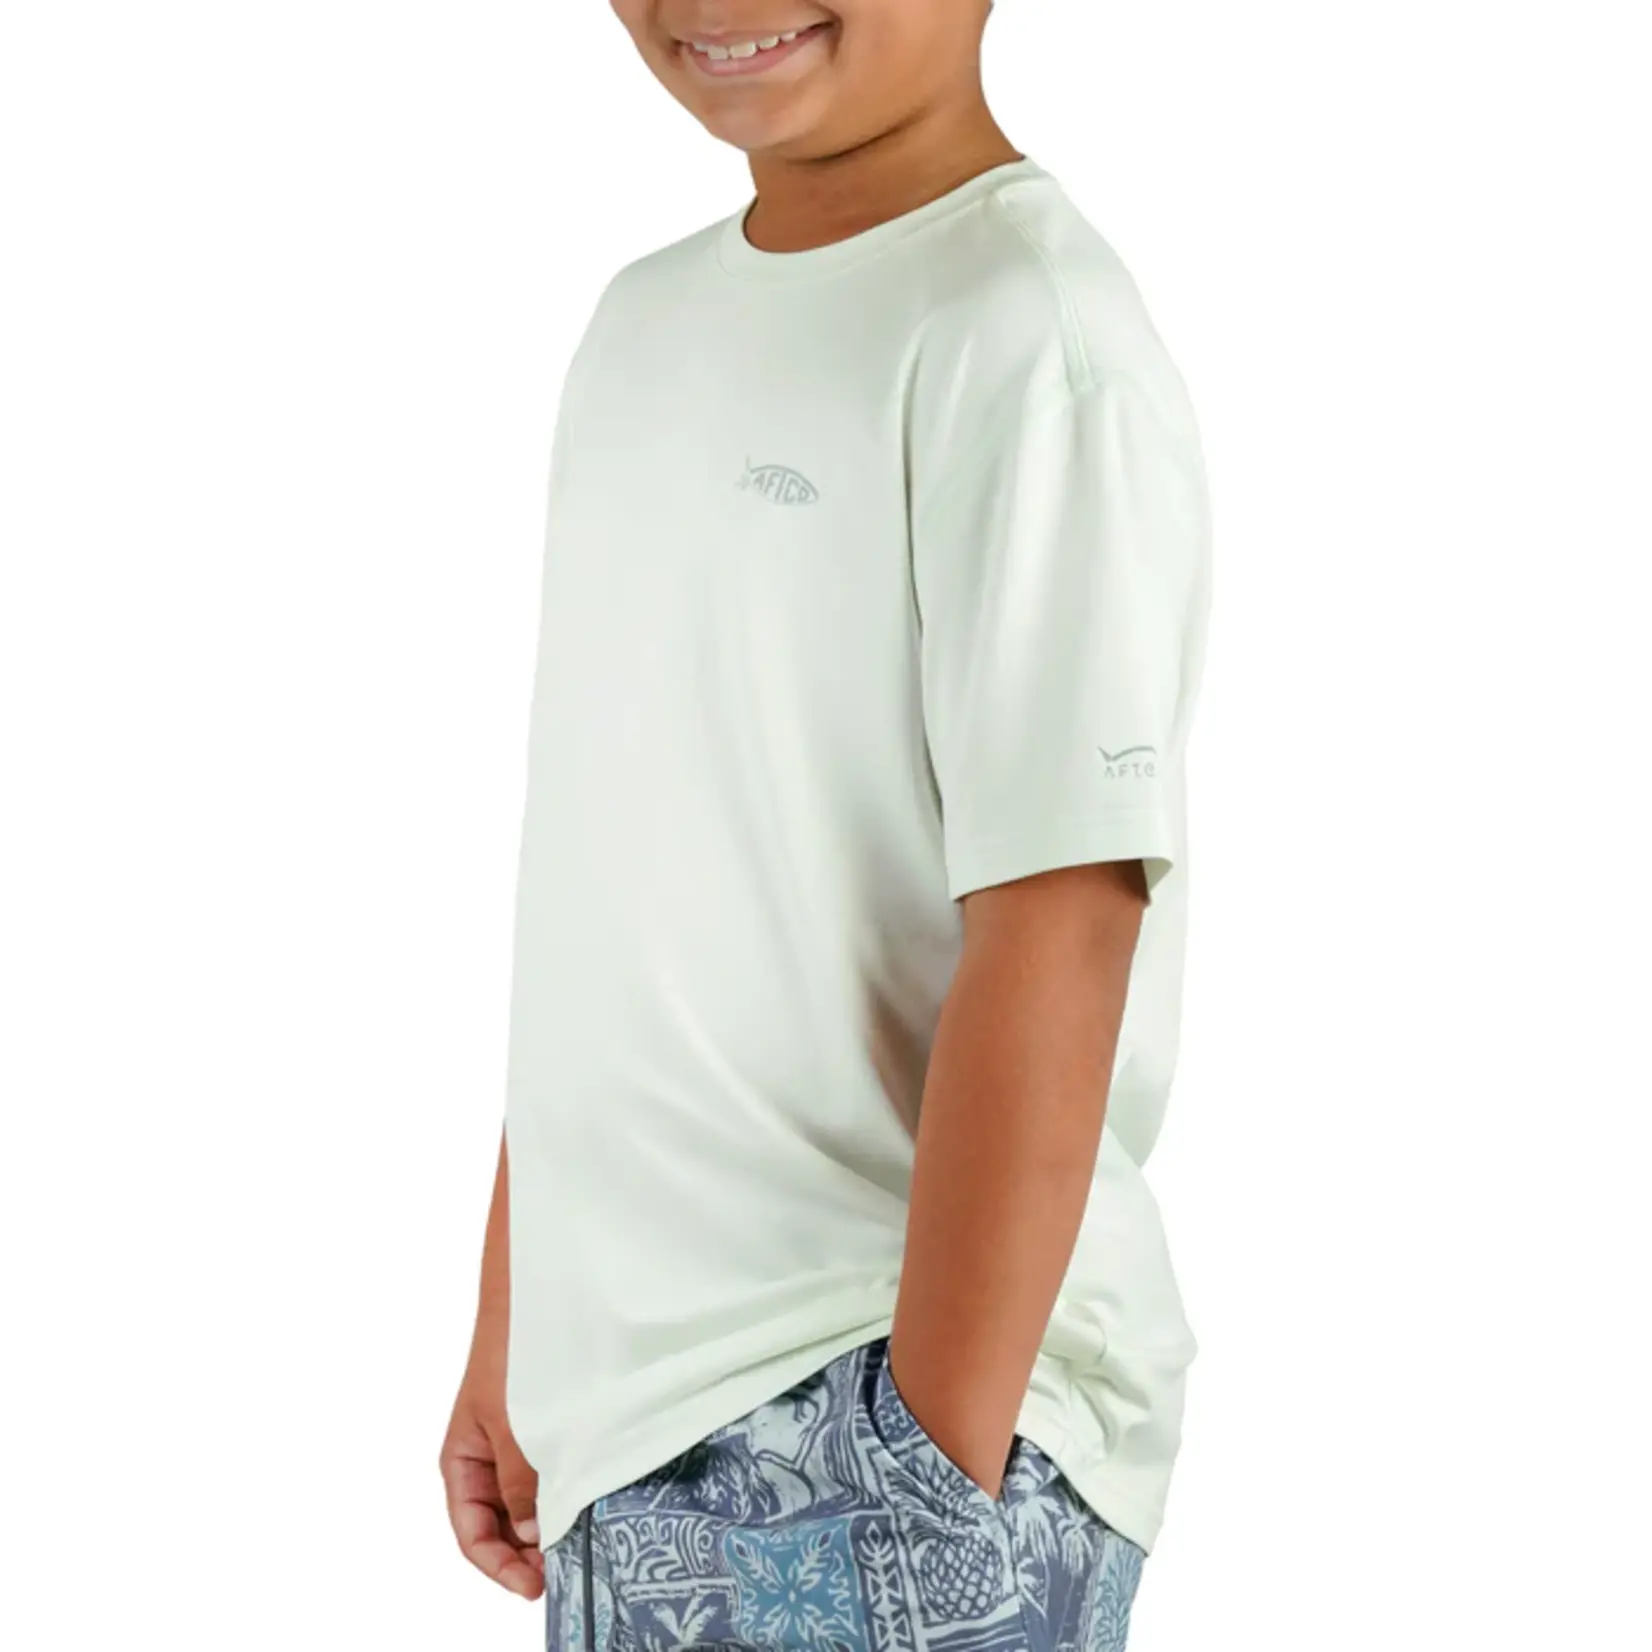 Aftco Aftco Youth Samurai S/S Performance Shirt